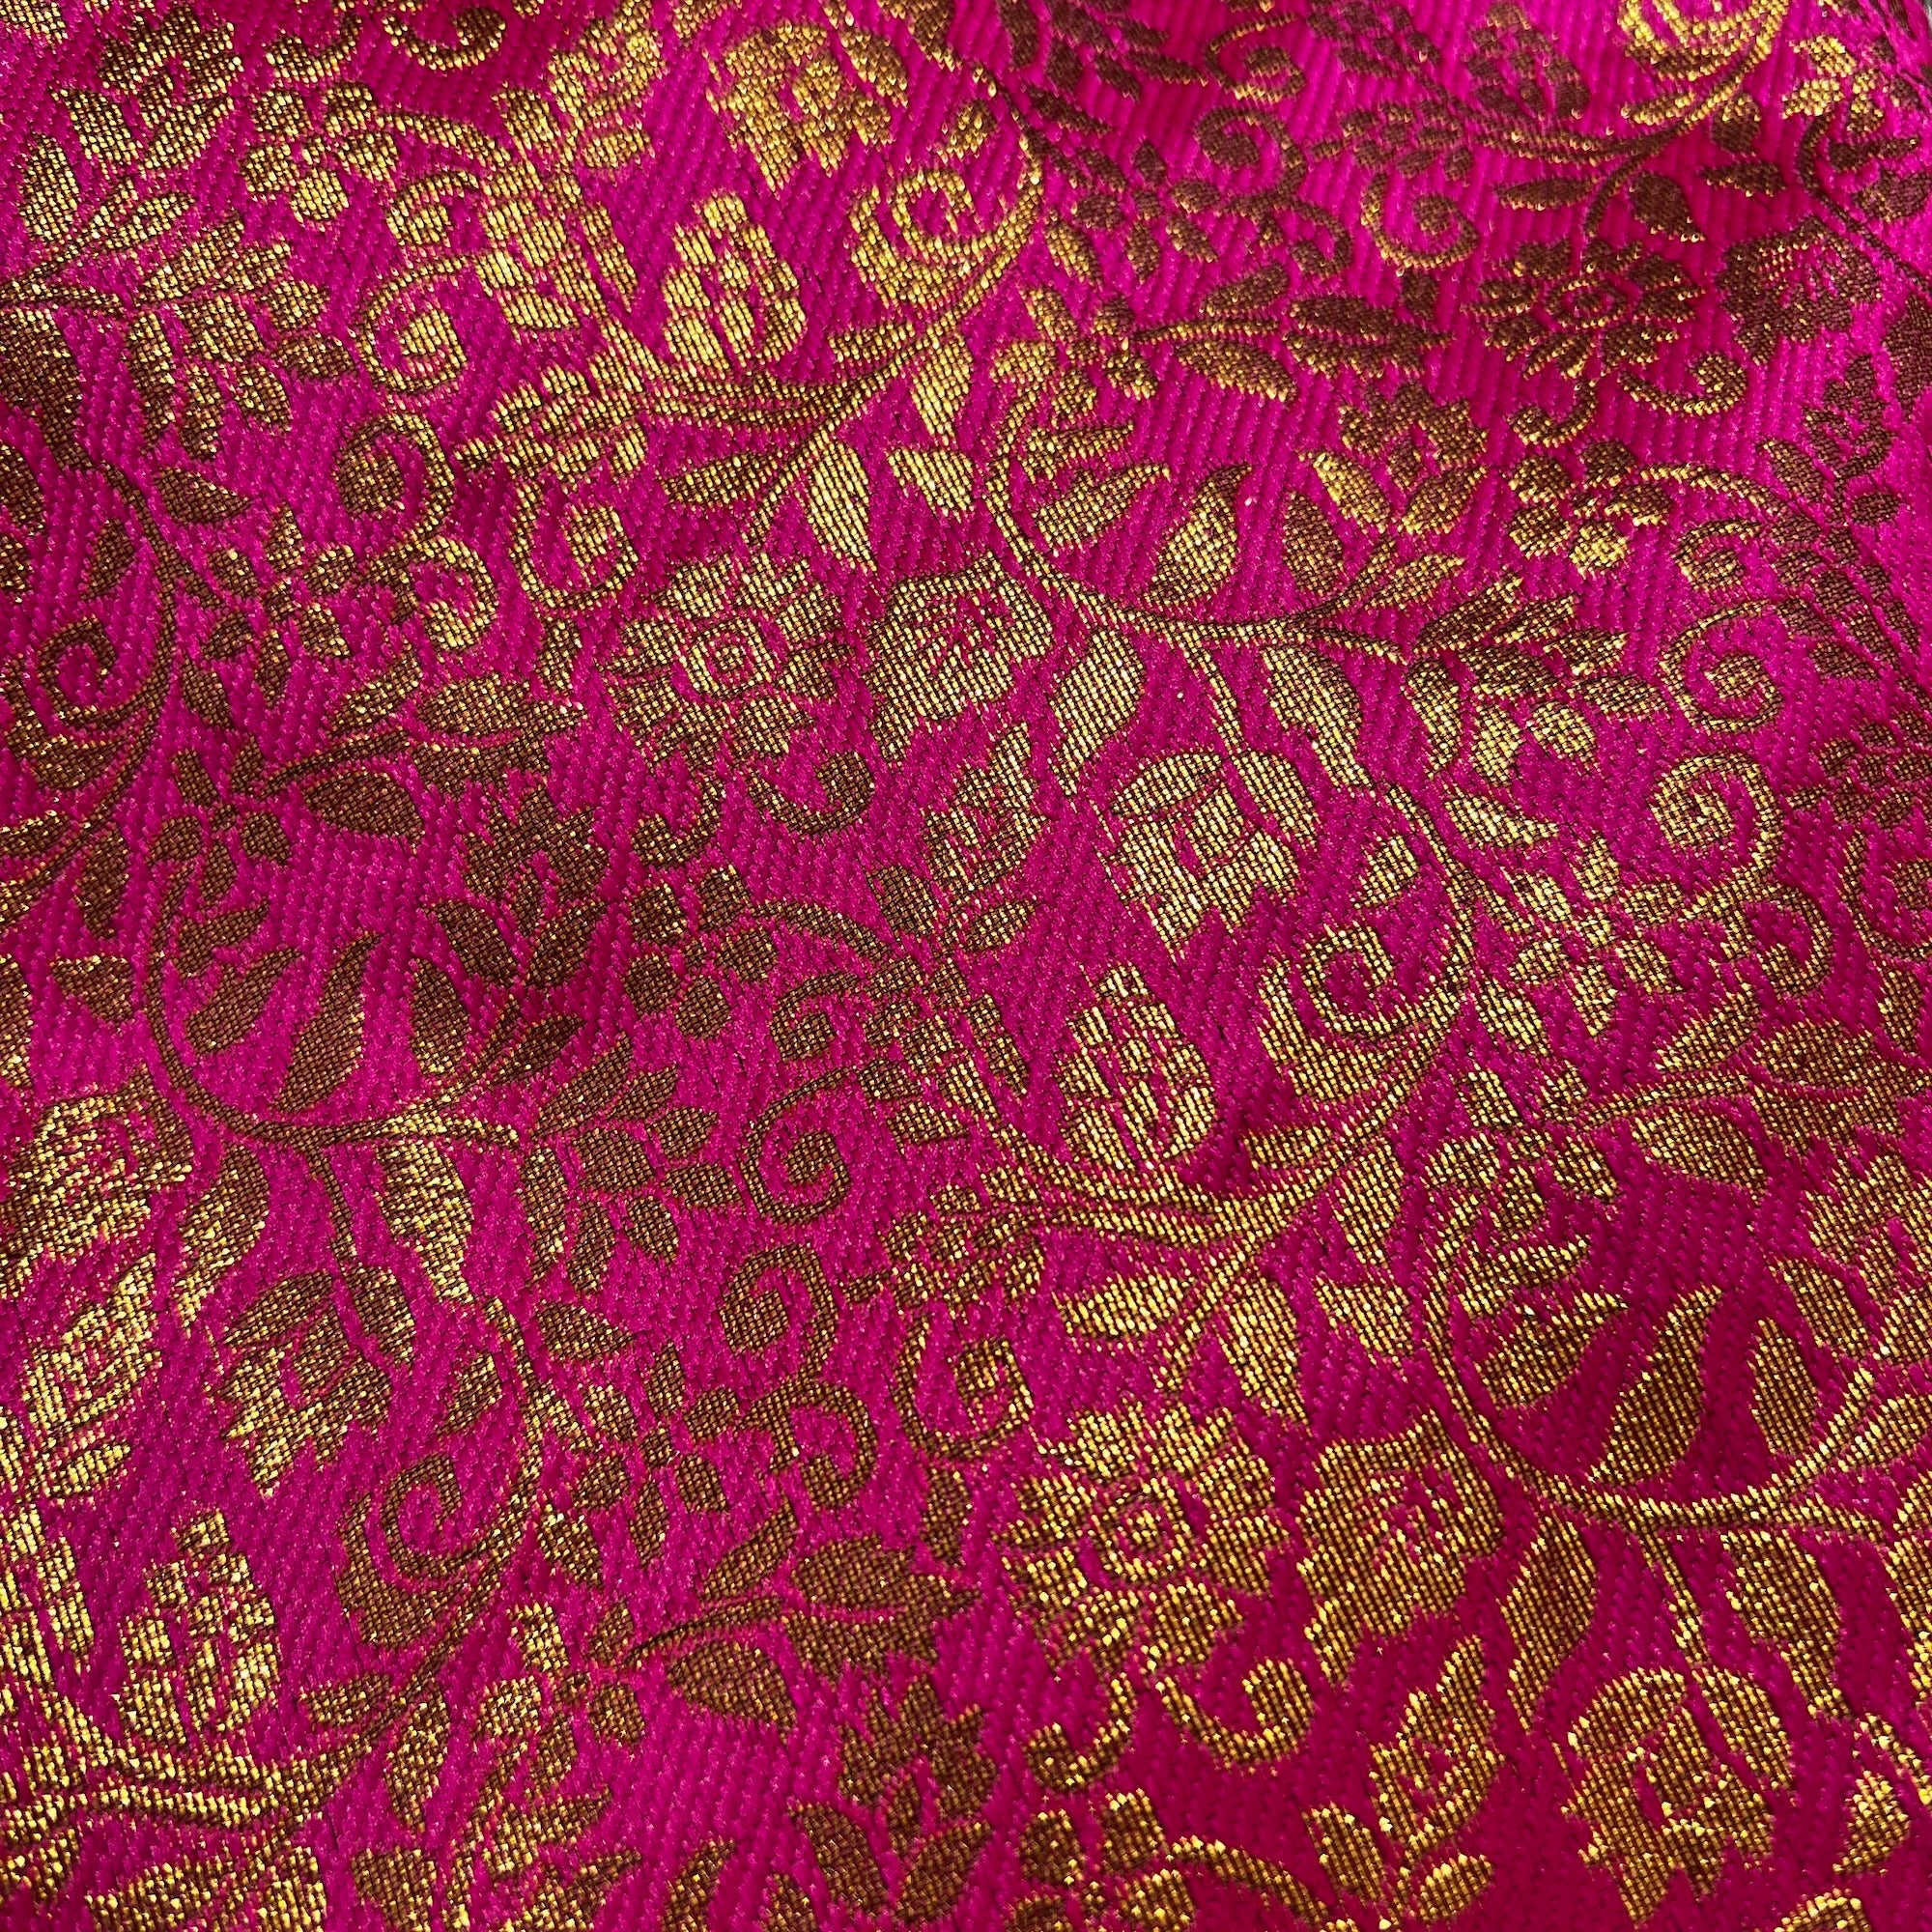 DT Bright Pink Brocade Floral Lehengas- 2 Styles/Lengths - Vintage India NYC